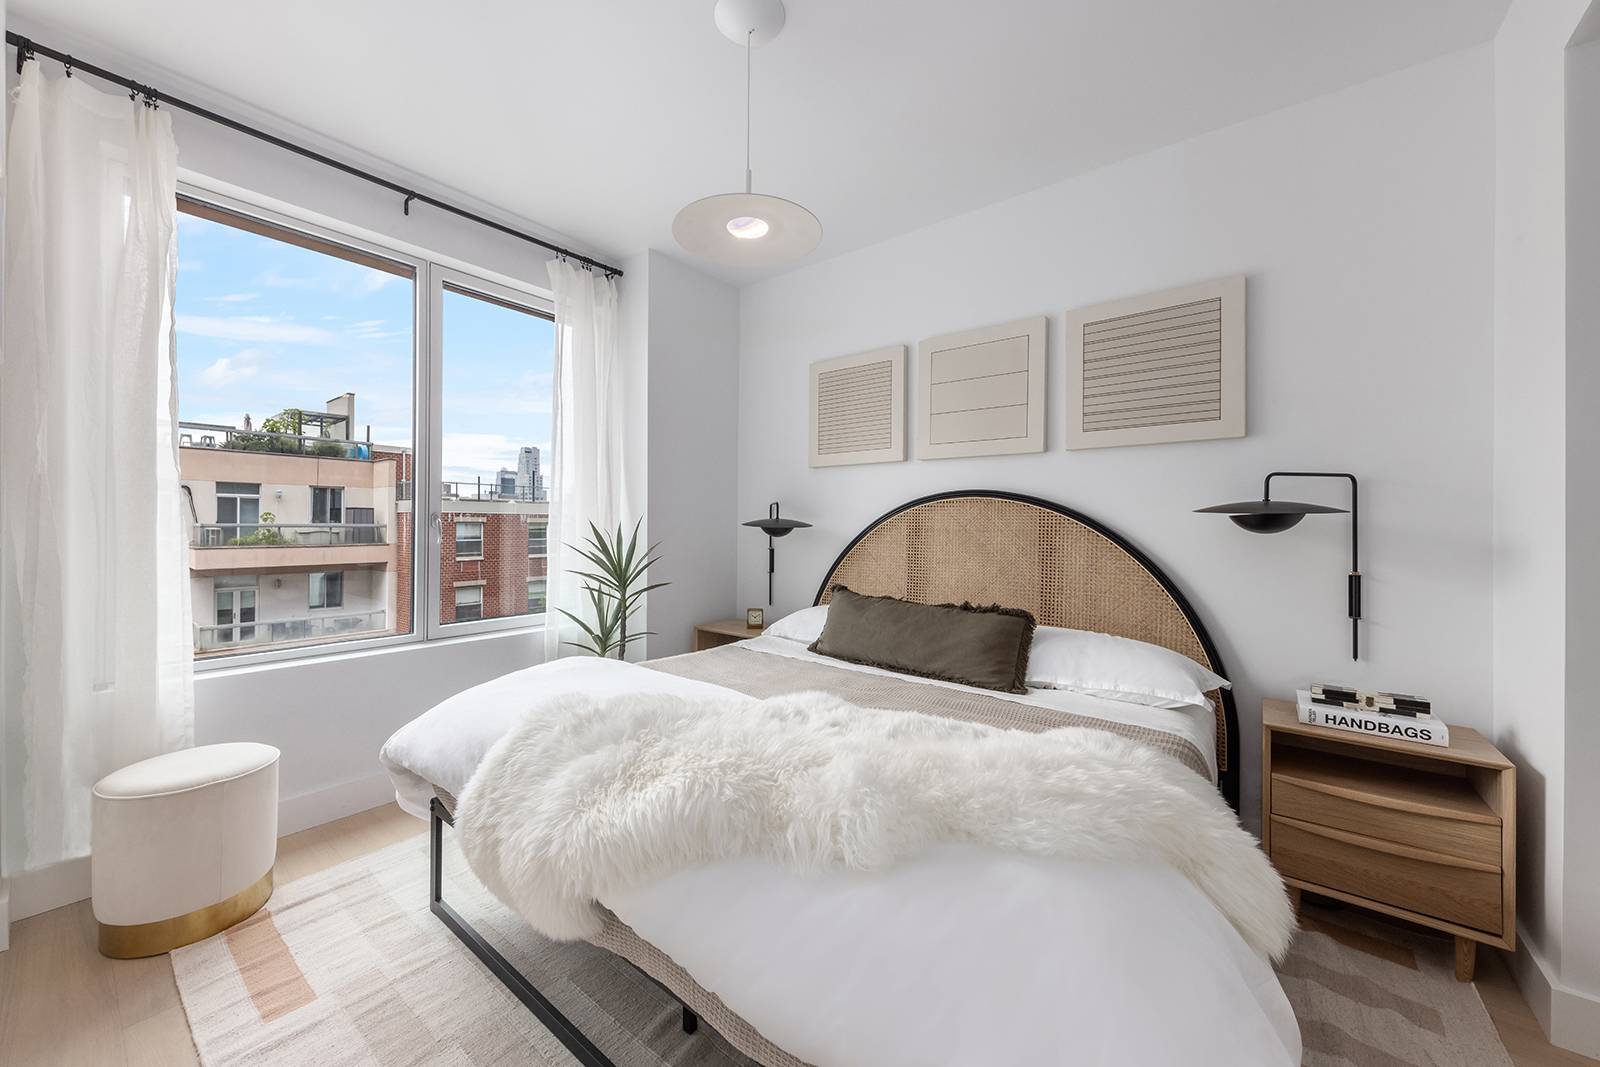 IMMEDIATE OCCUPANCY. Introducing 208 Delancey, a one of a kind building whose curved exterior, rounded corner windows, and spacious balconies bring light, air, and views to everyday life.